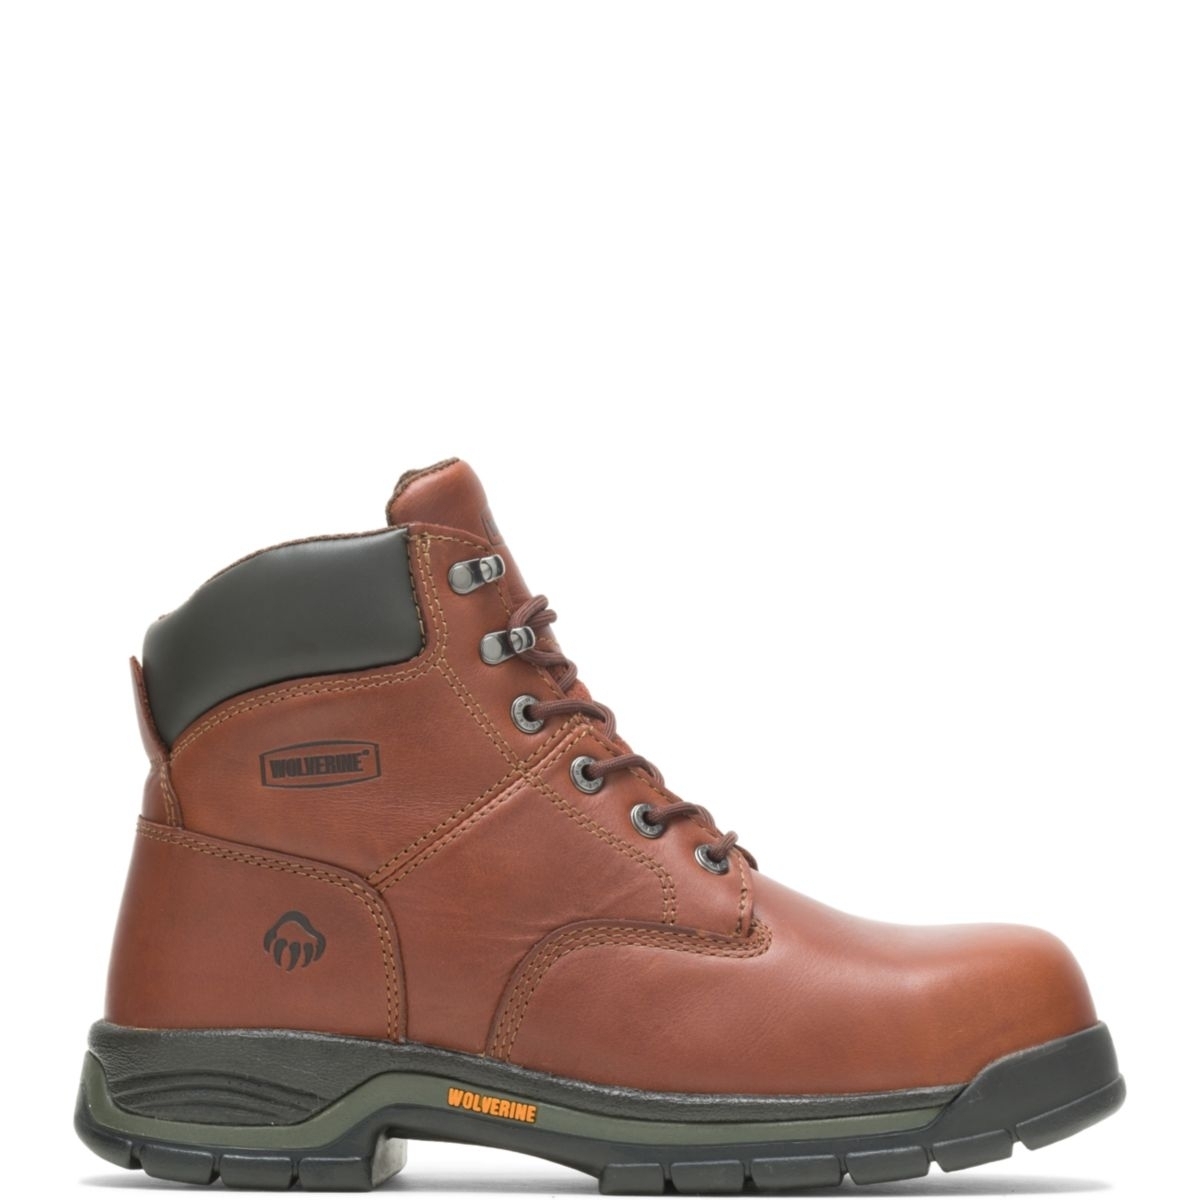 WOLVERINE Men's Harrison 6 Lace-Up SoftToe Work Boot Brown - W04906 Varies BROWN - BROWN, 7 XX-Wide